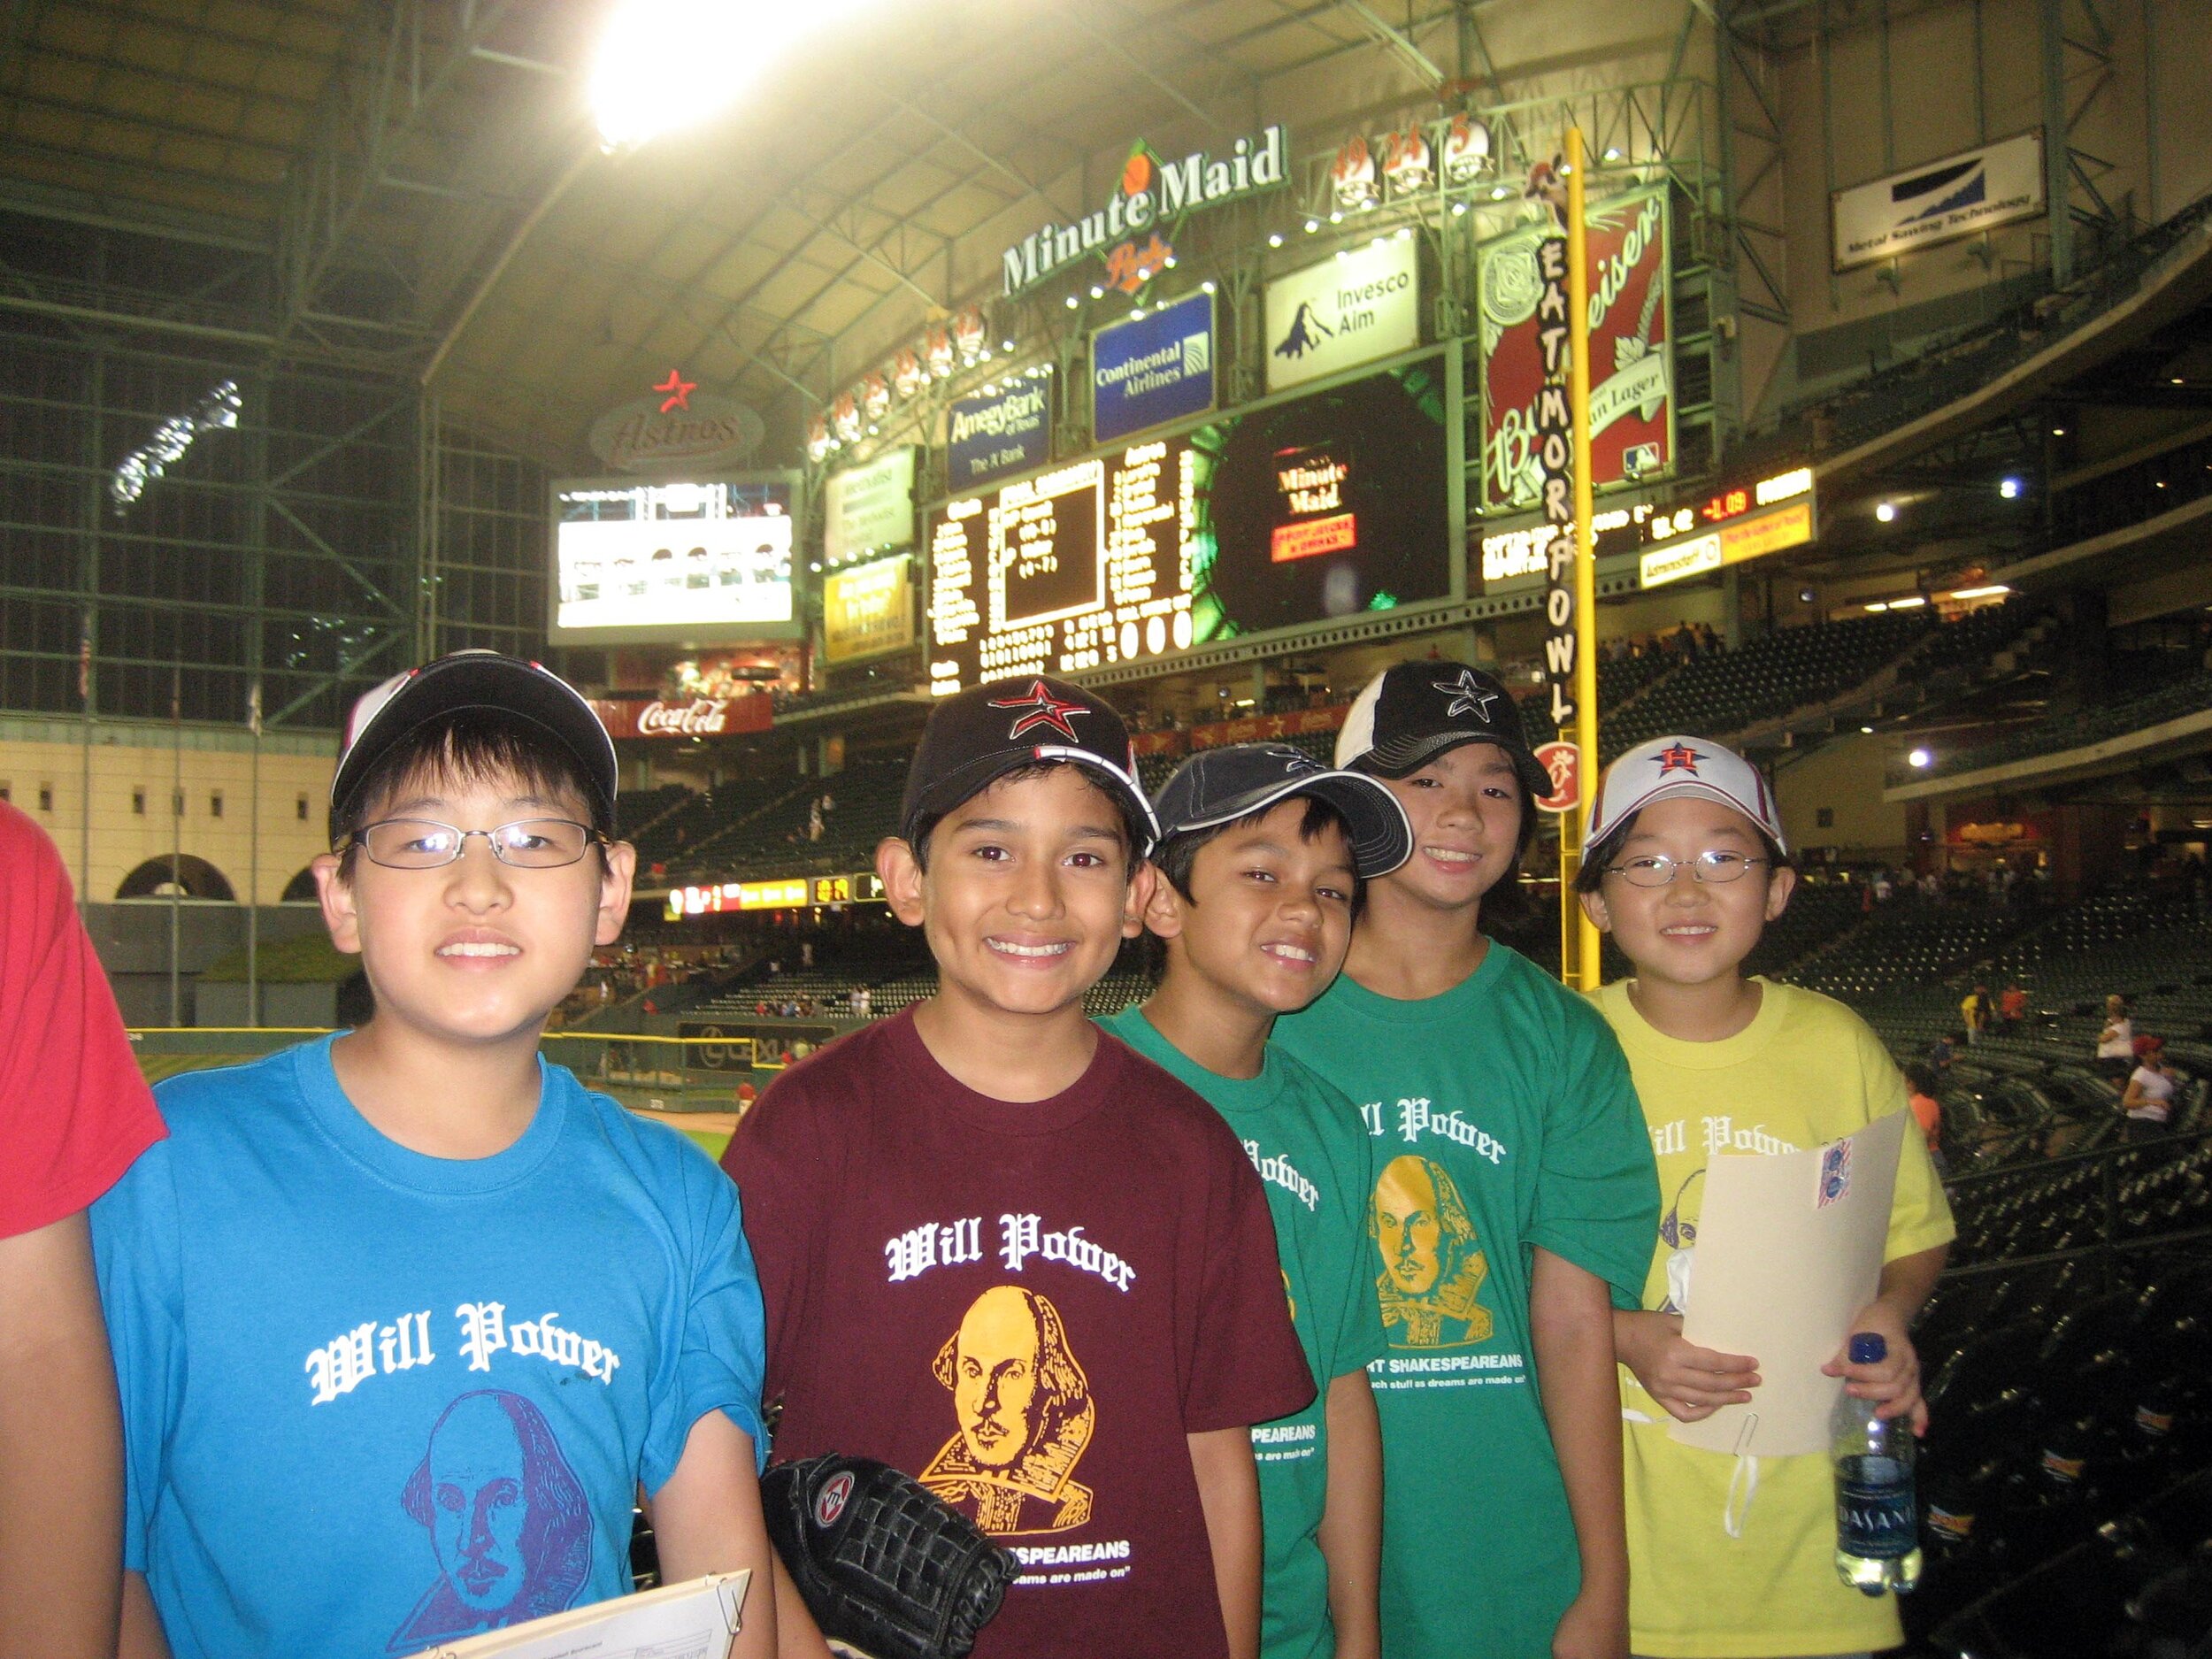  Scoring the game at Minute Maid Park 